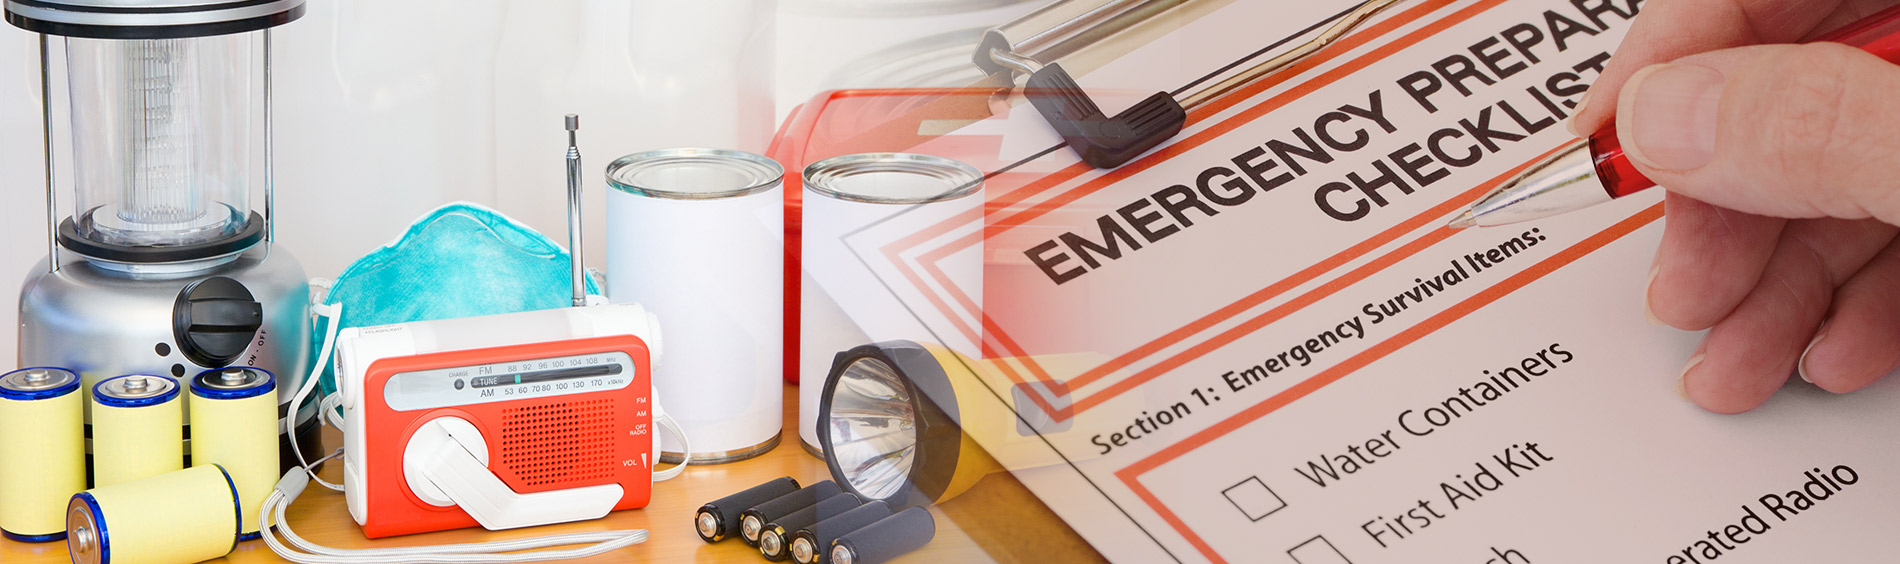 emergency materials and clipboard